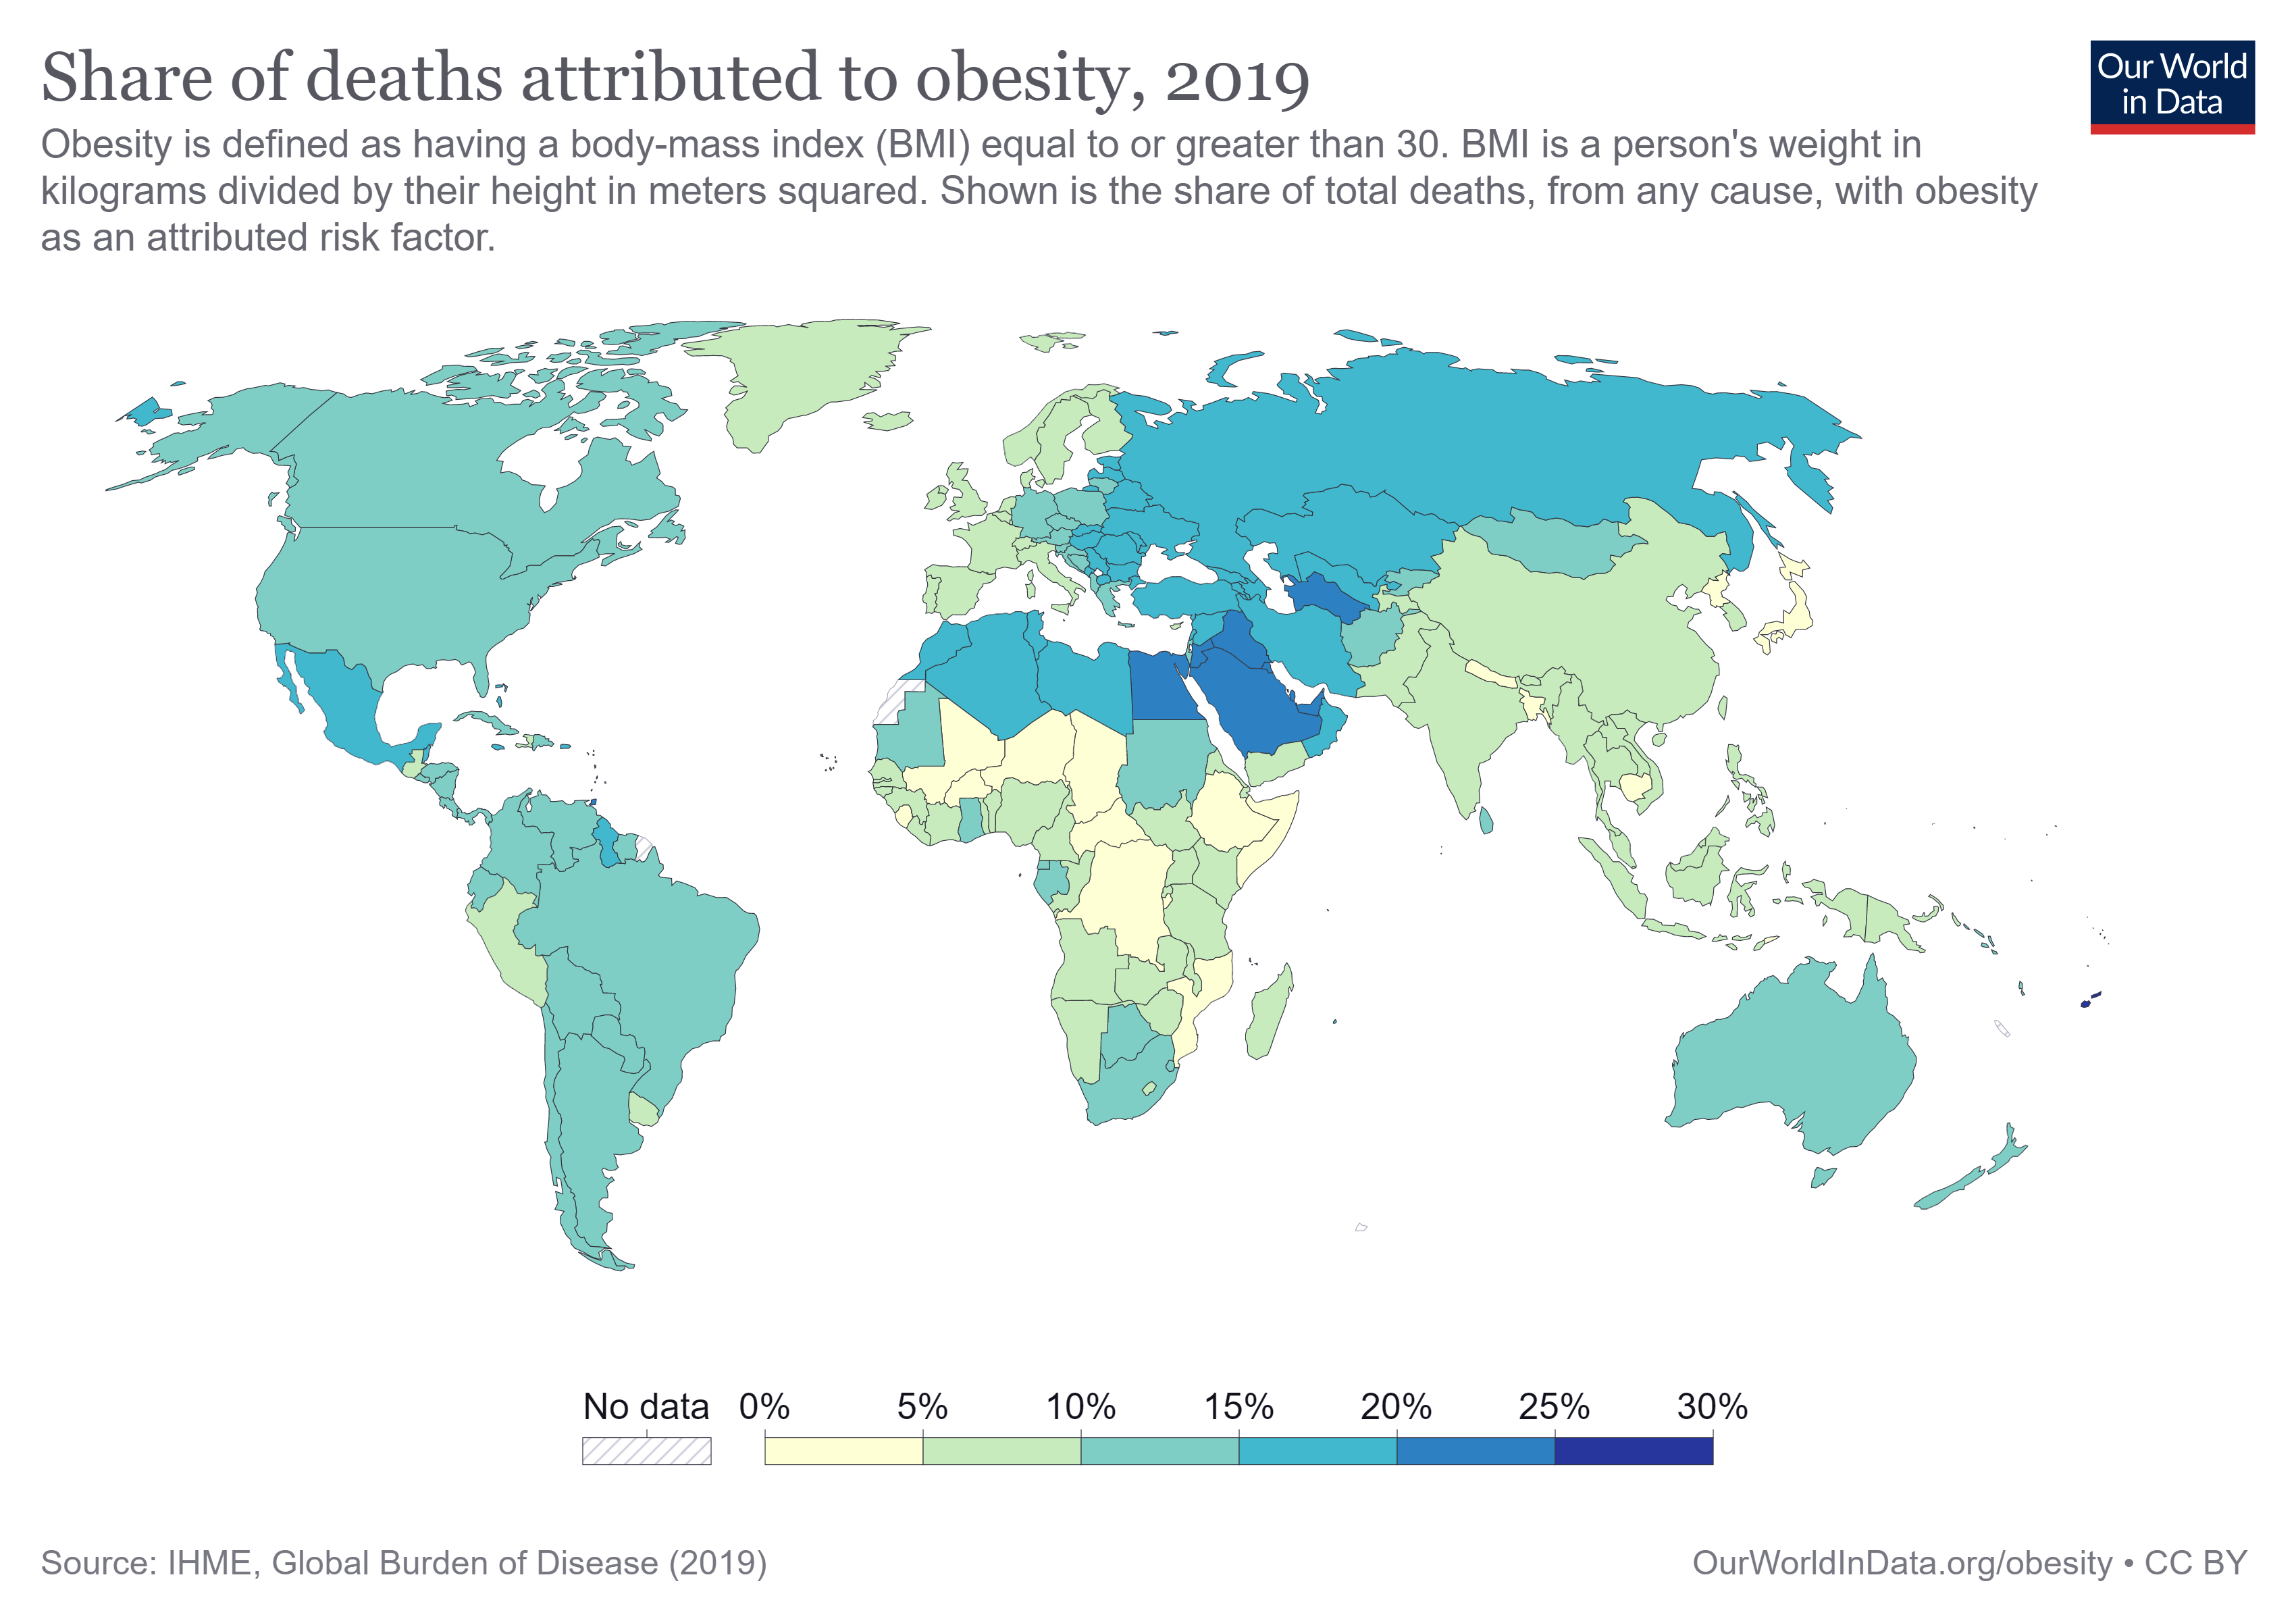 share-of-deaths-obesity.png